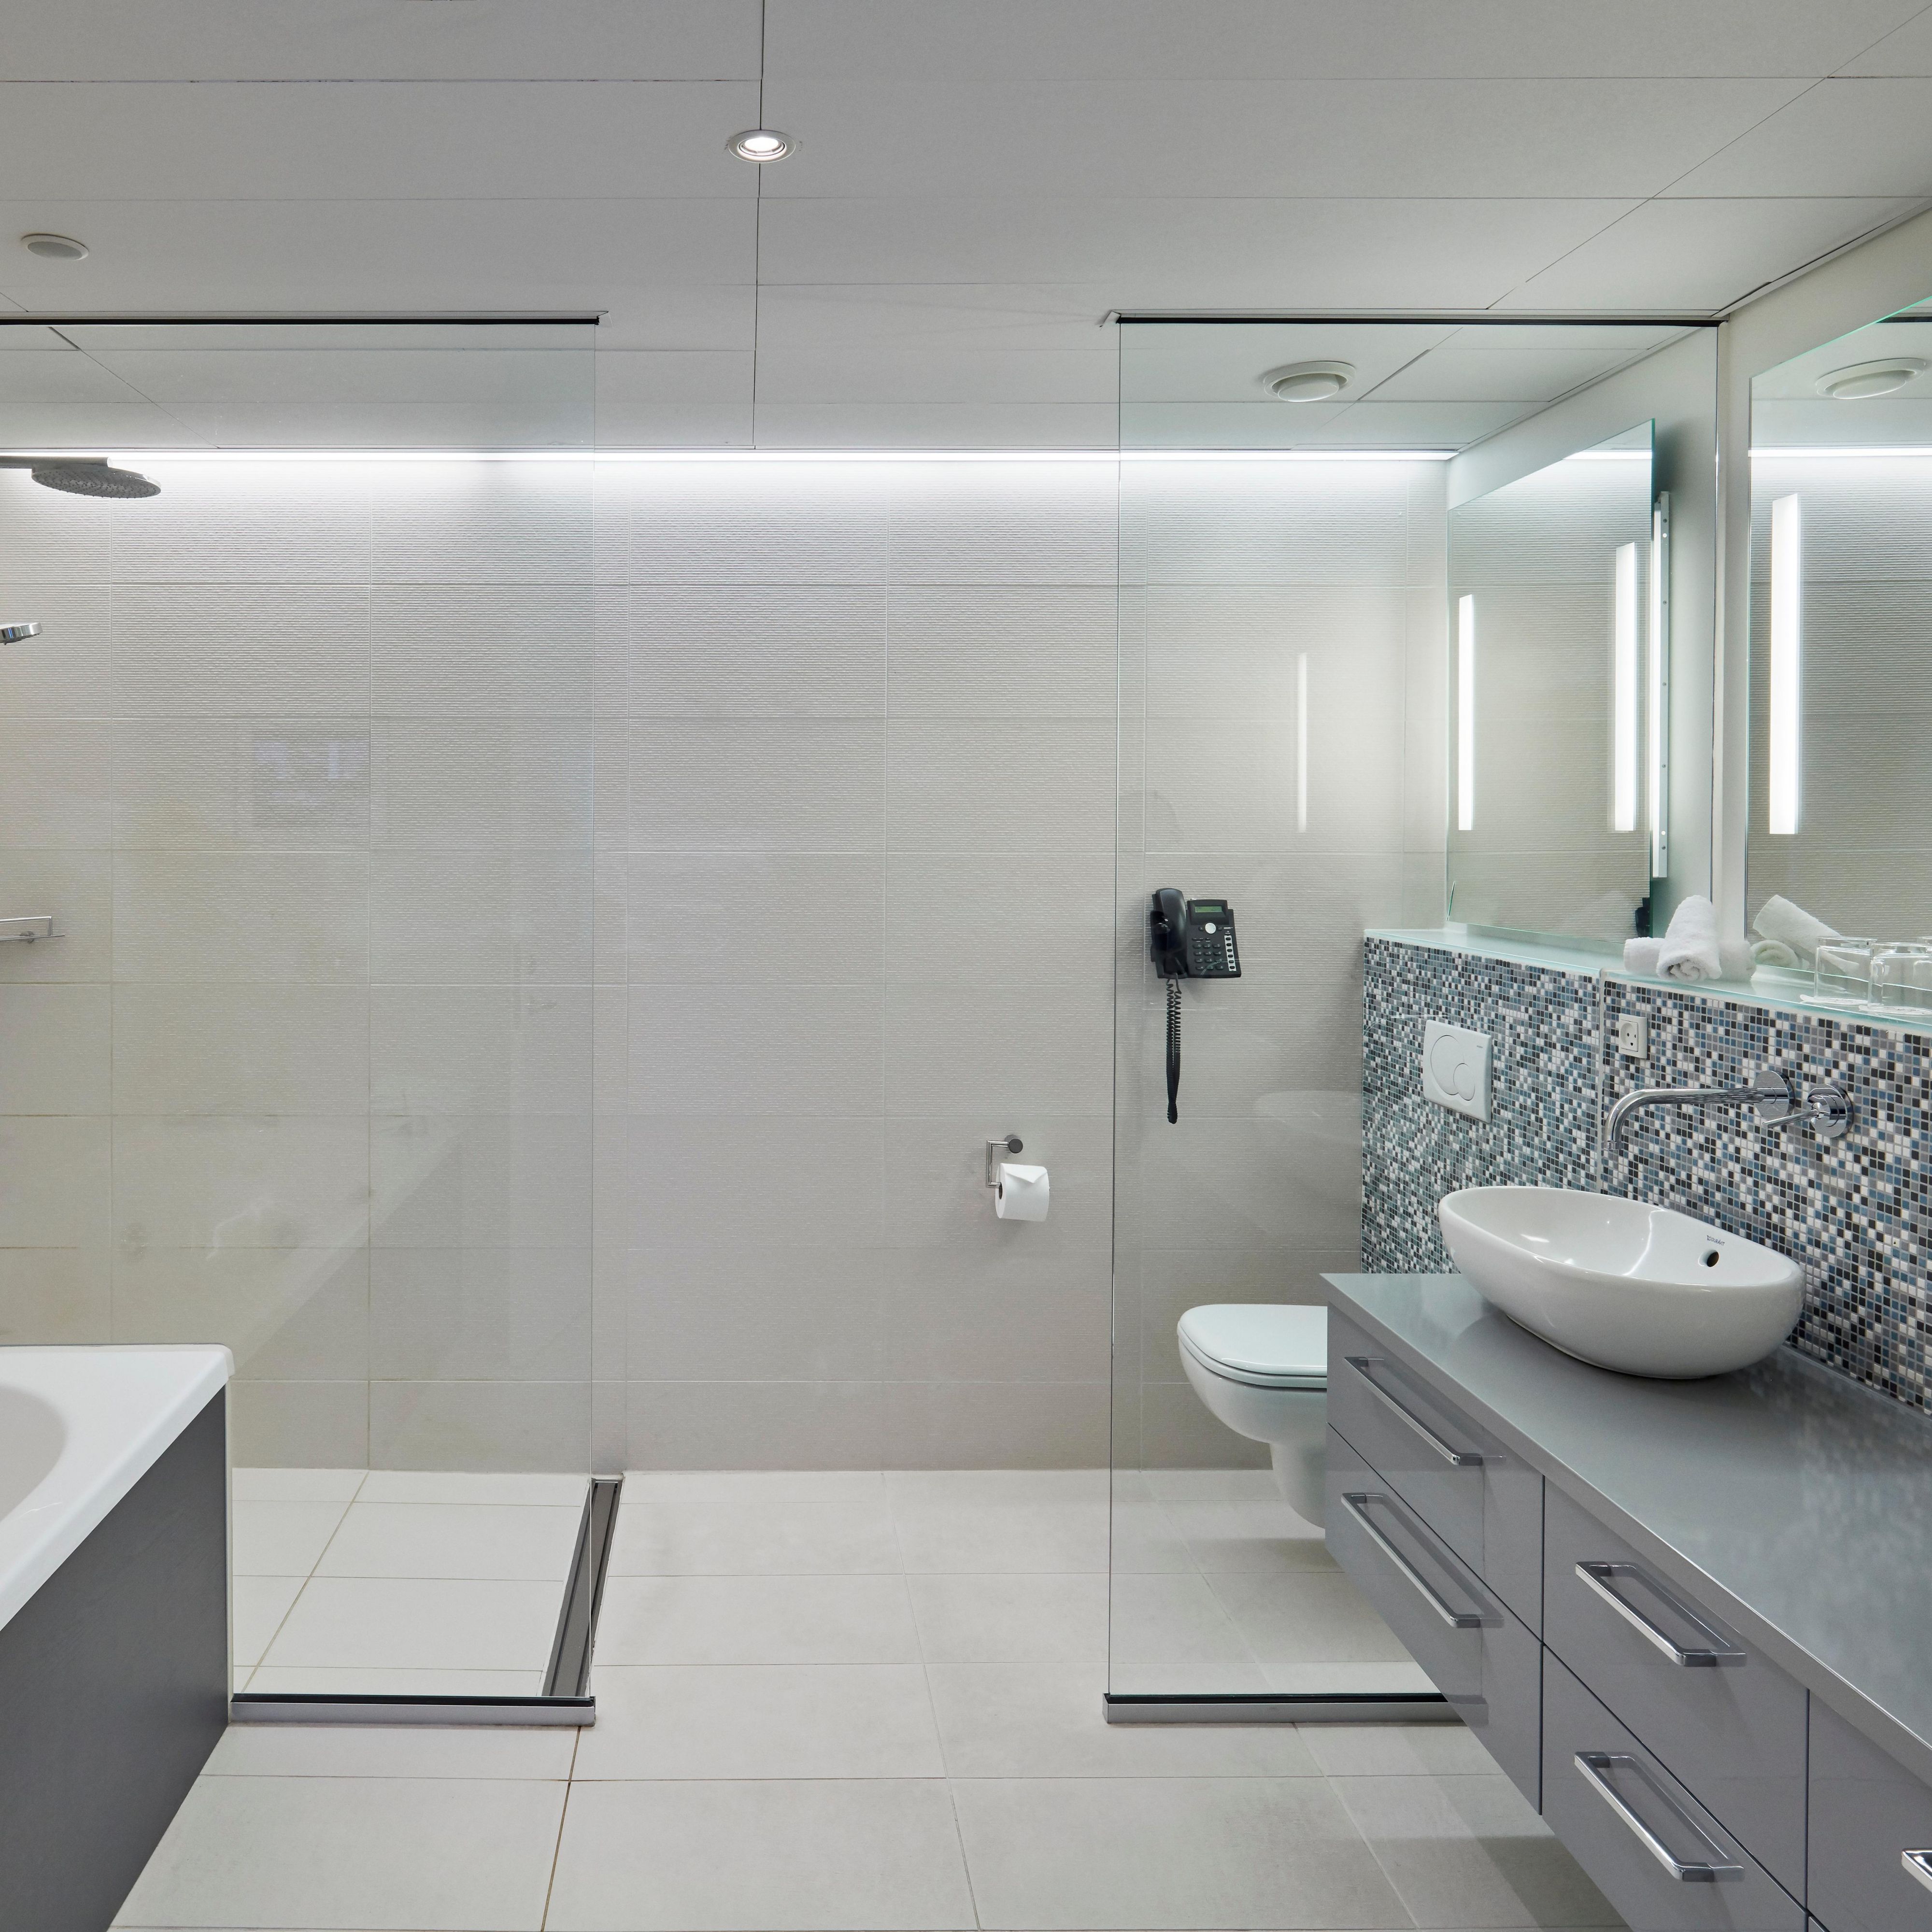 Get ready for the day in our spacious bathrooms